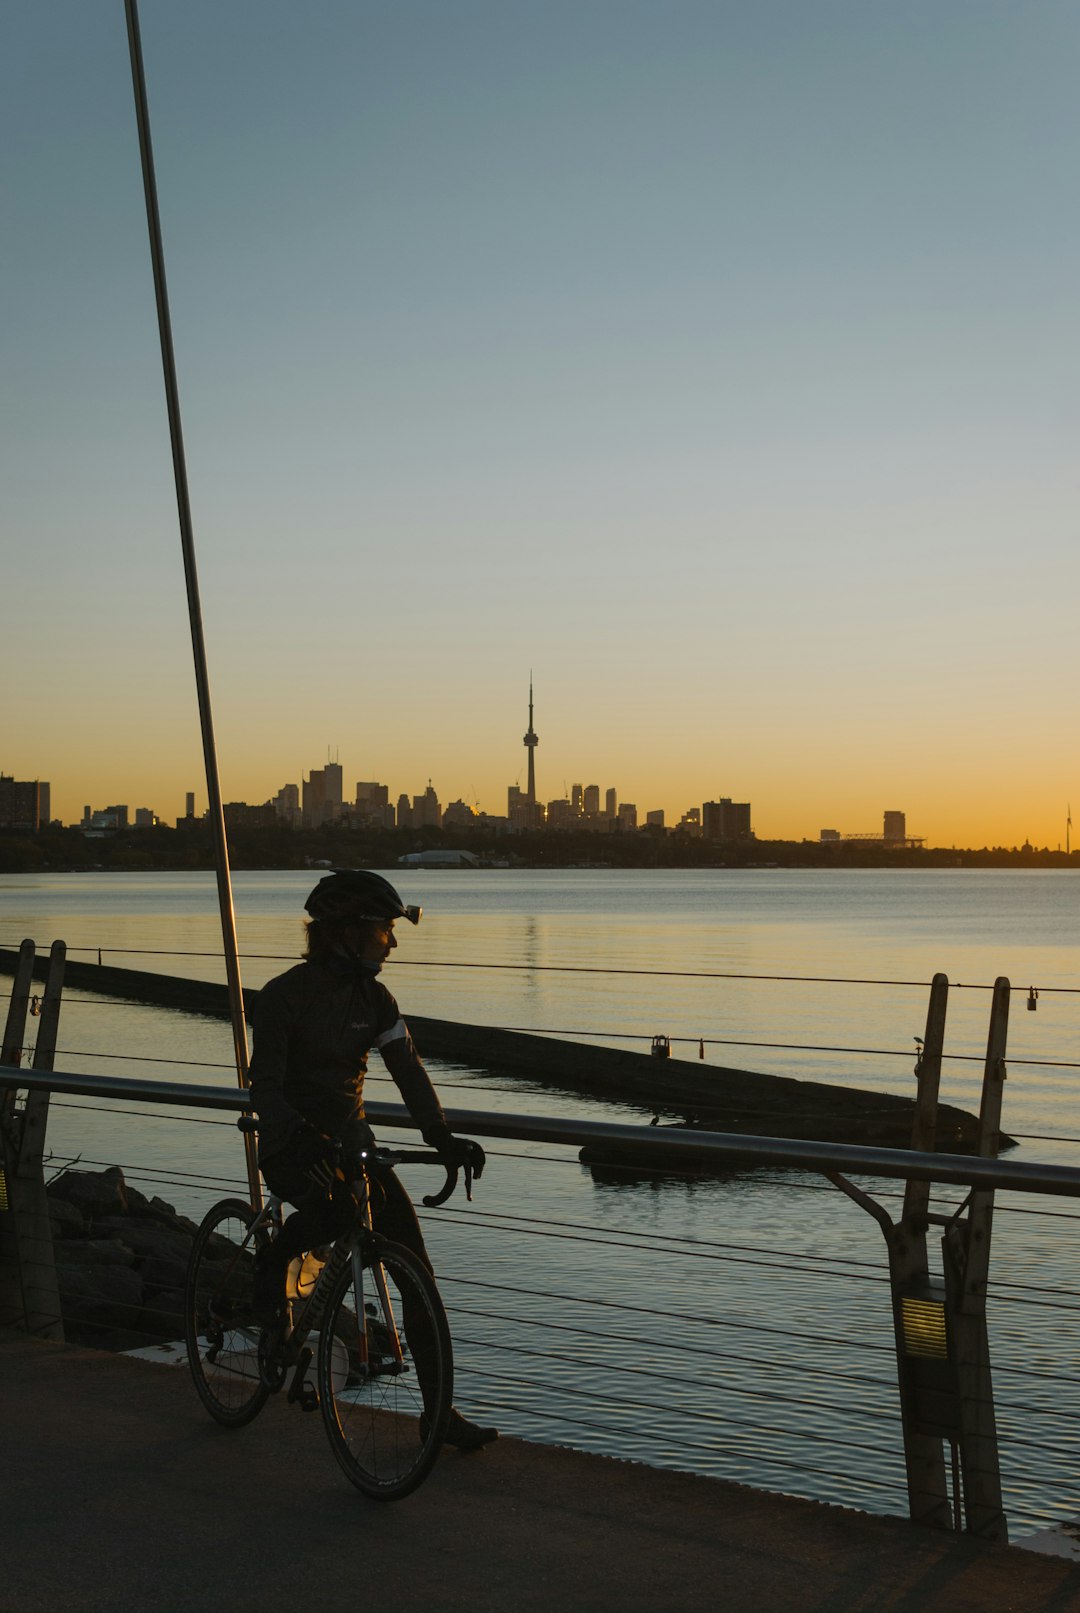 man in black jacket riding bicycle near body of water during sunset